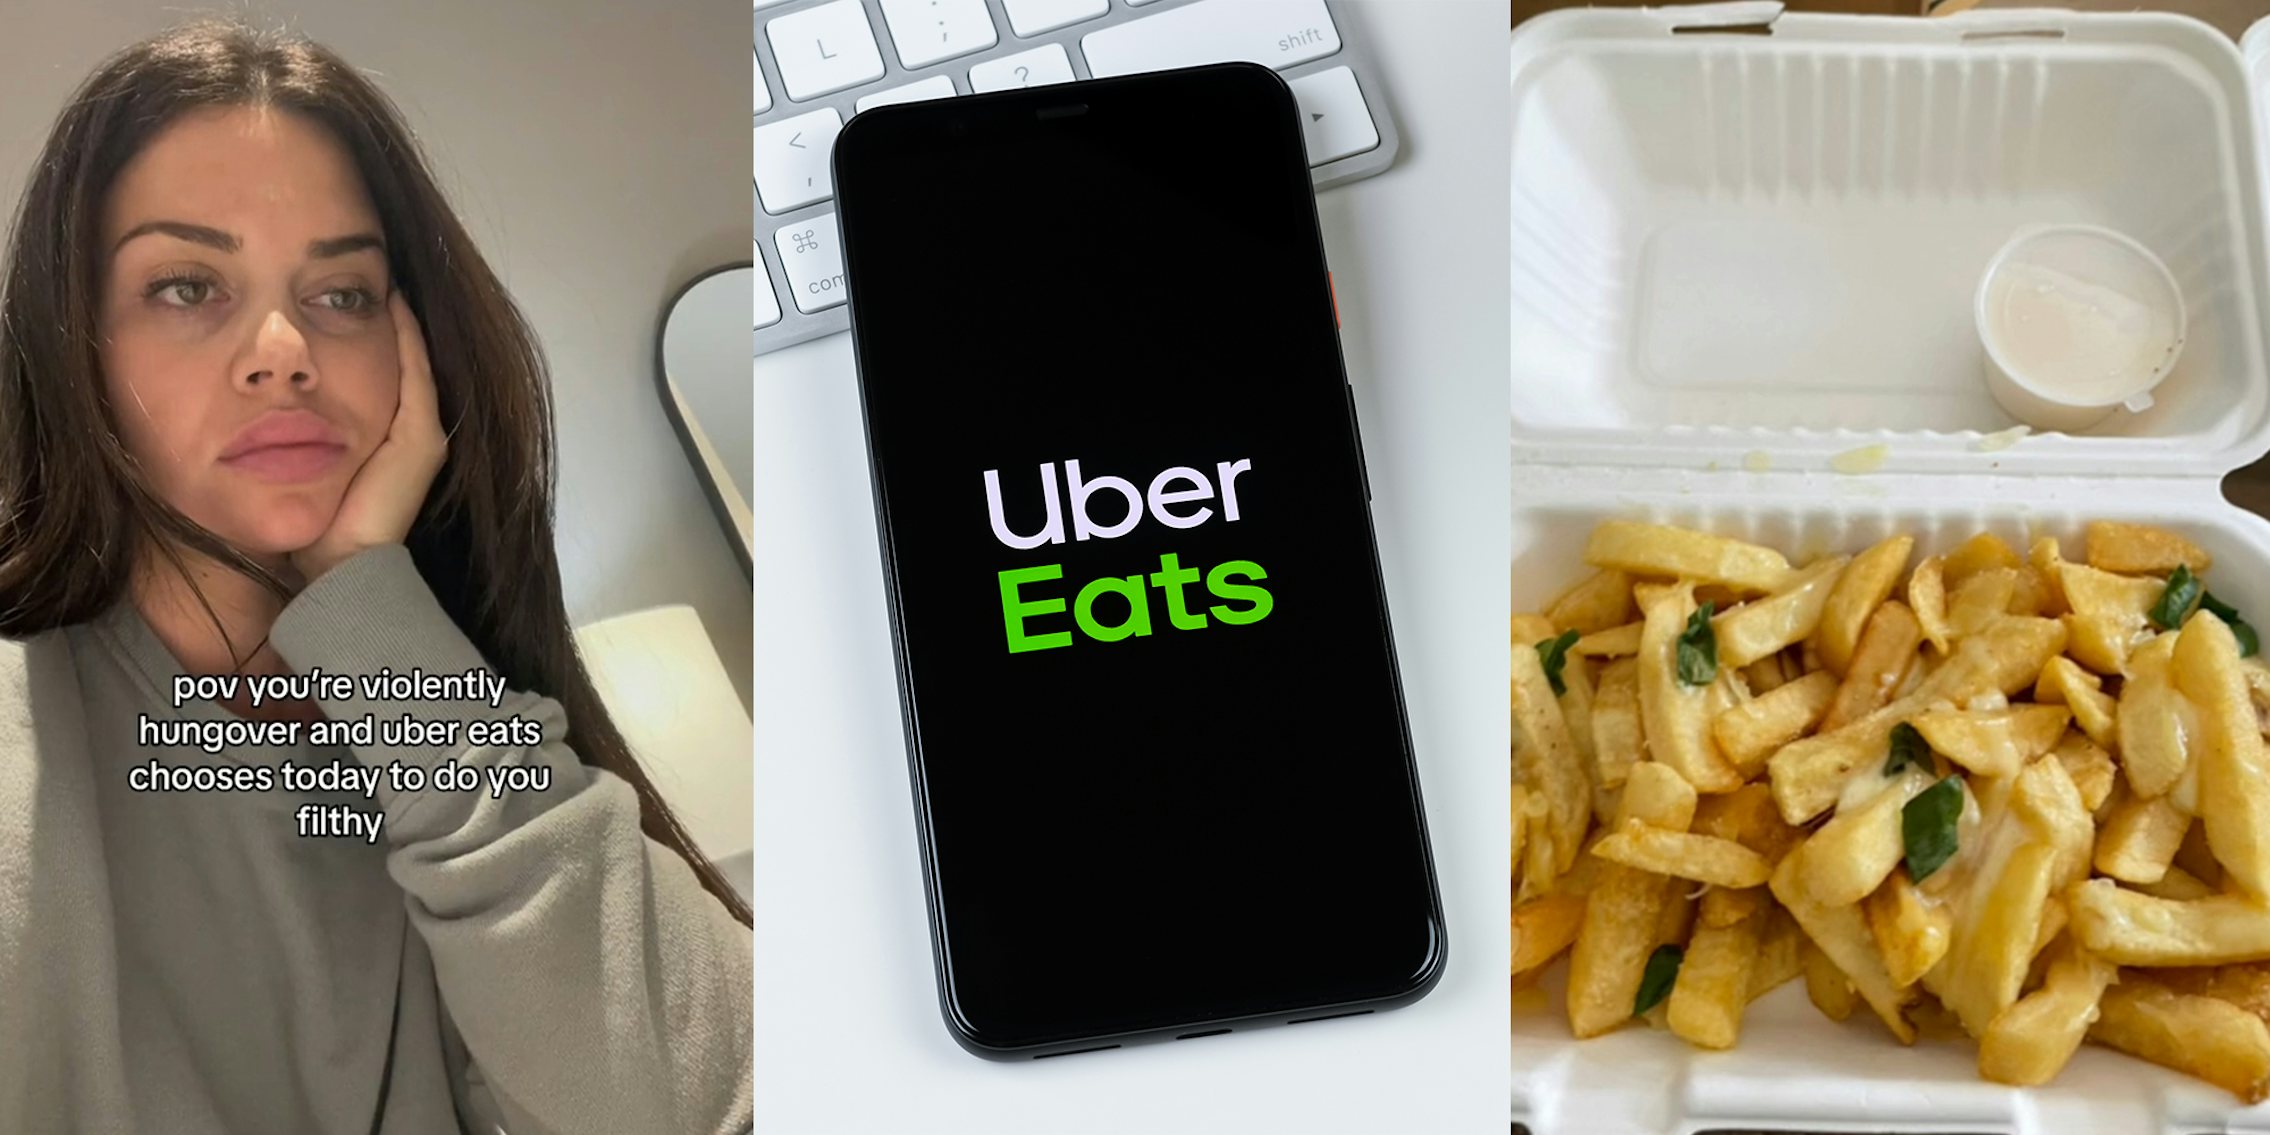 'Violently hungover' customer orders loaded fries from Uber Eats